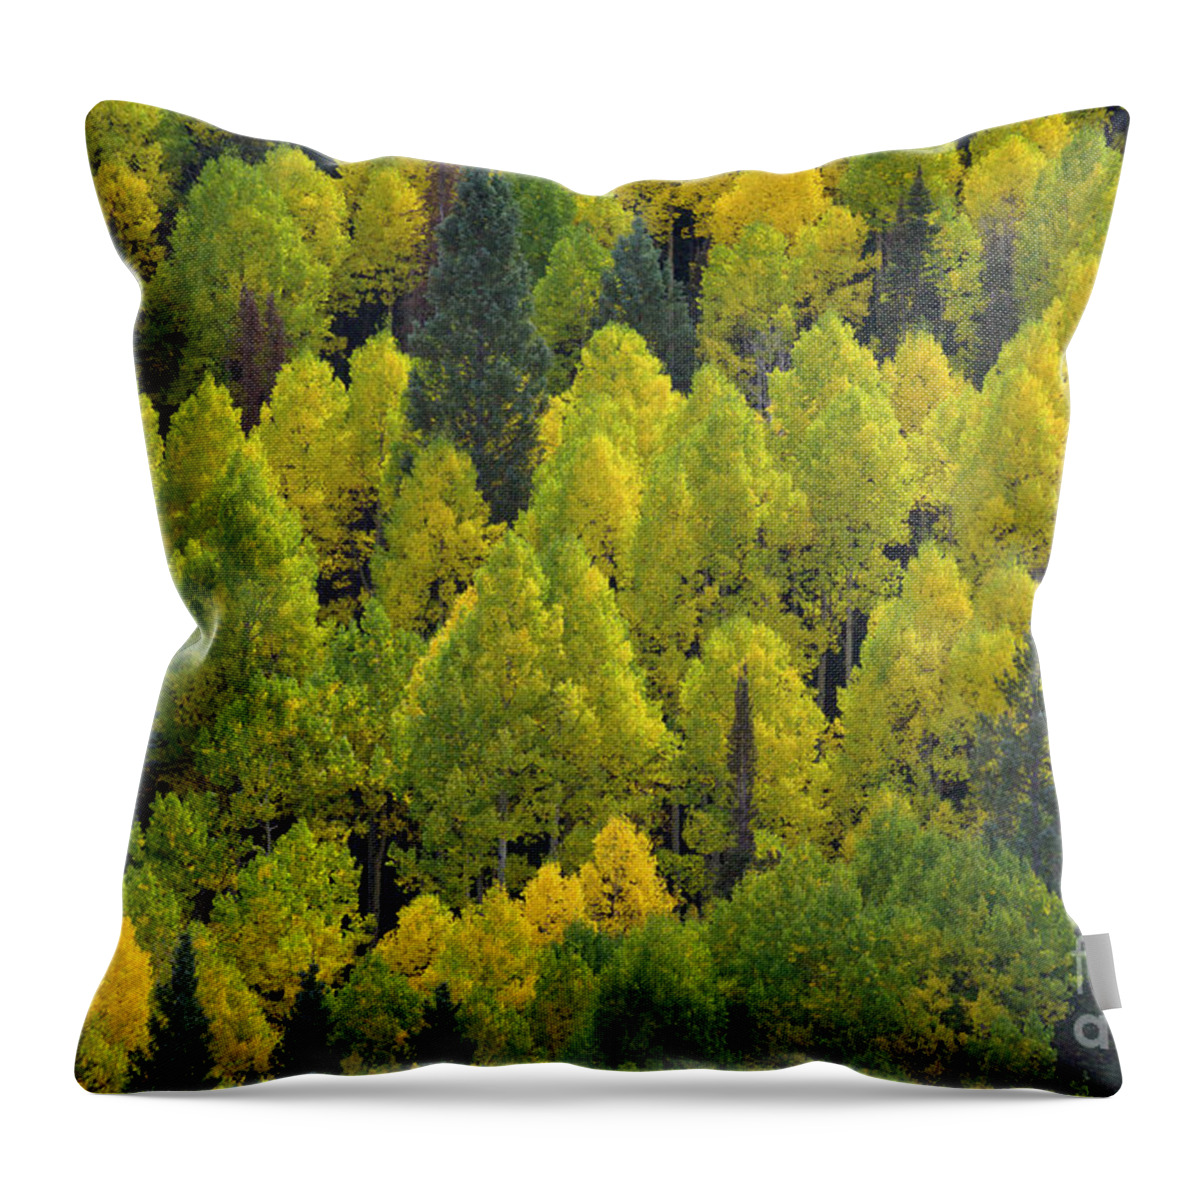 00559294 Throw Pillow featuring the photograph Autumn Quaking Aspens, Colorado by Yva Momatiuk and John Eastcott